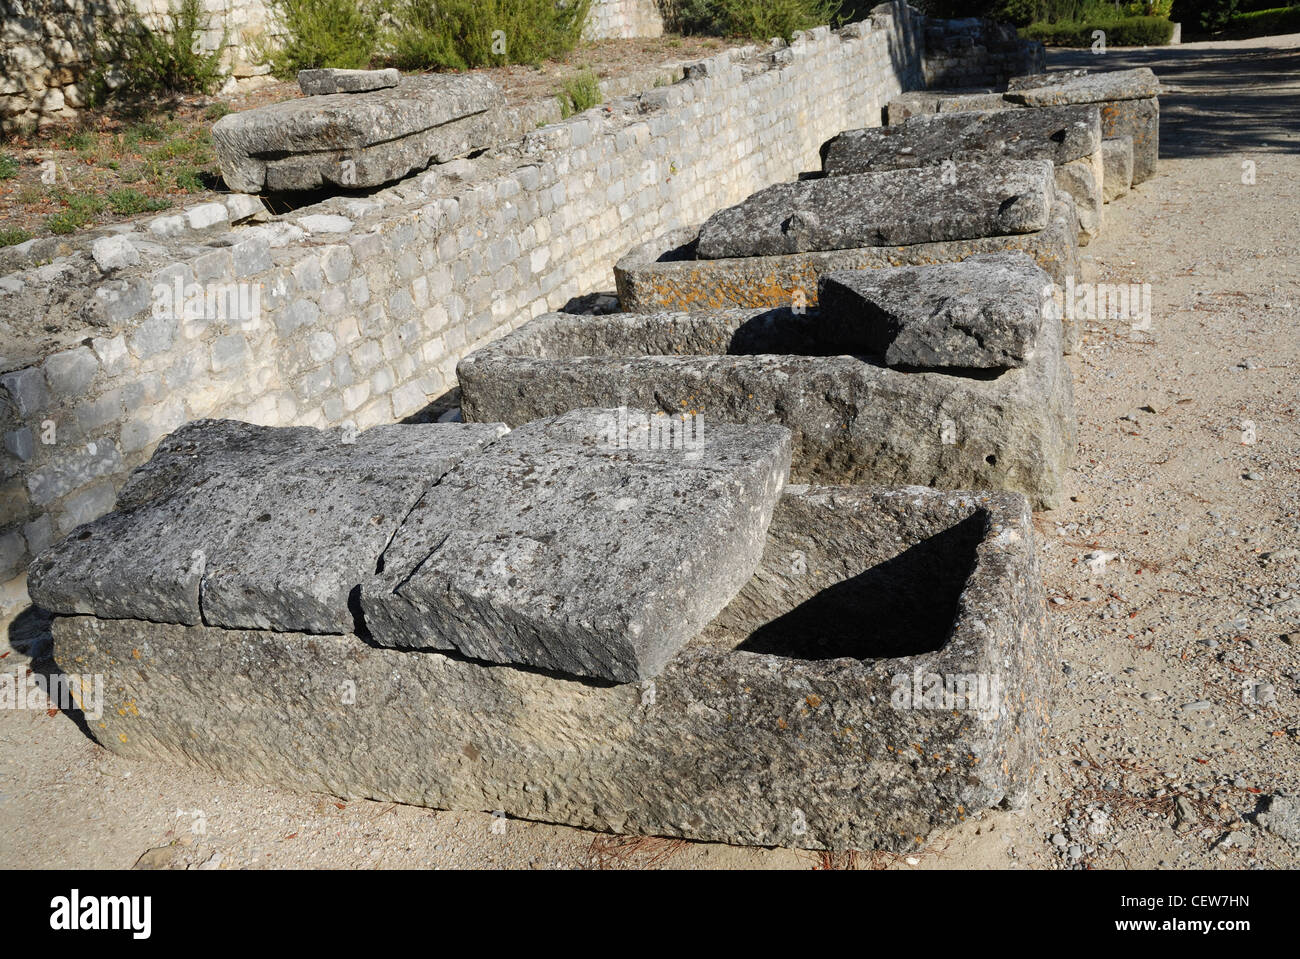 Stone coffins at the Roman archaeological site of Puymin at Vaison-la-Romaine, Vaucluse, Provence, France. Stock Photo